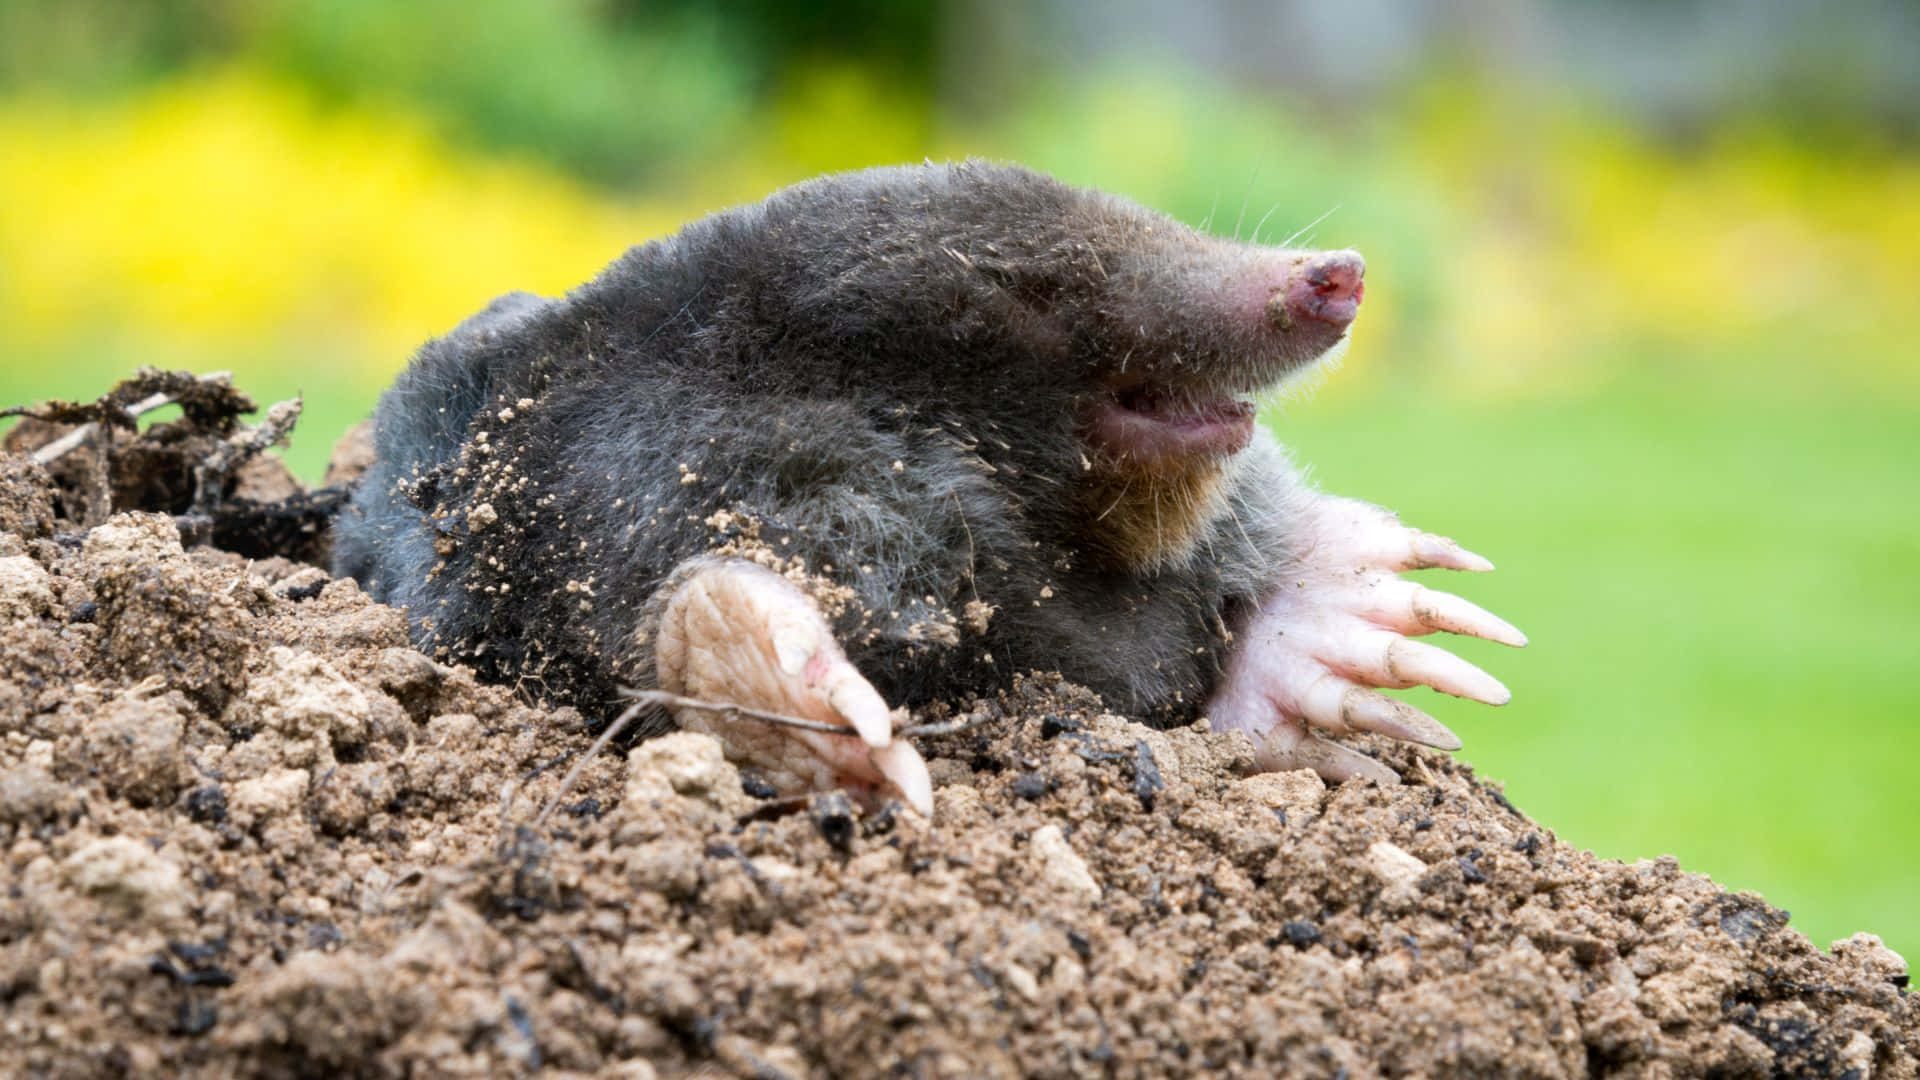 Mole Emerging From Ground Wallpaper